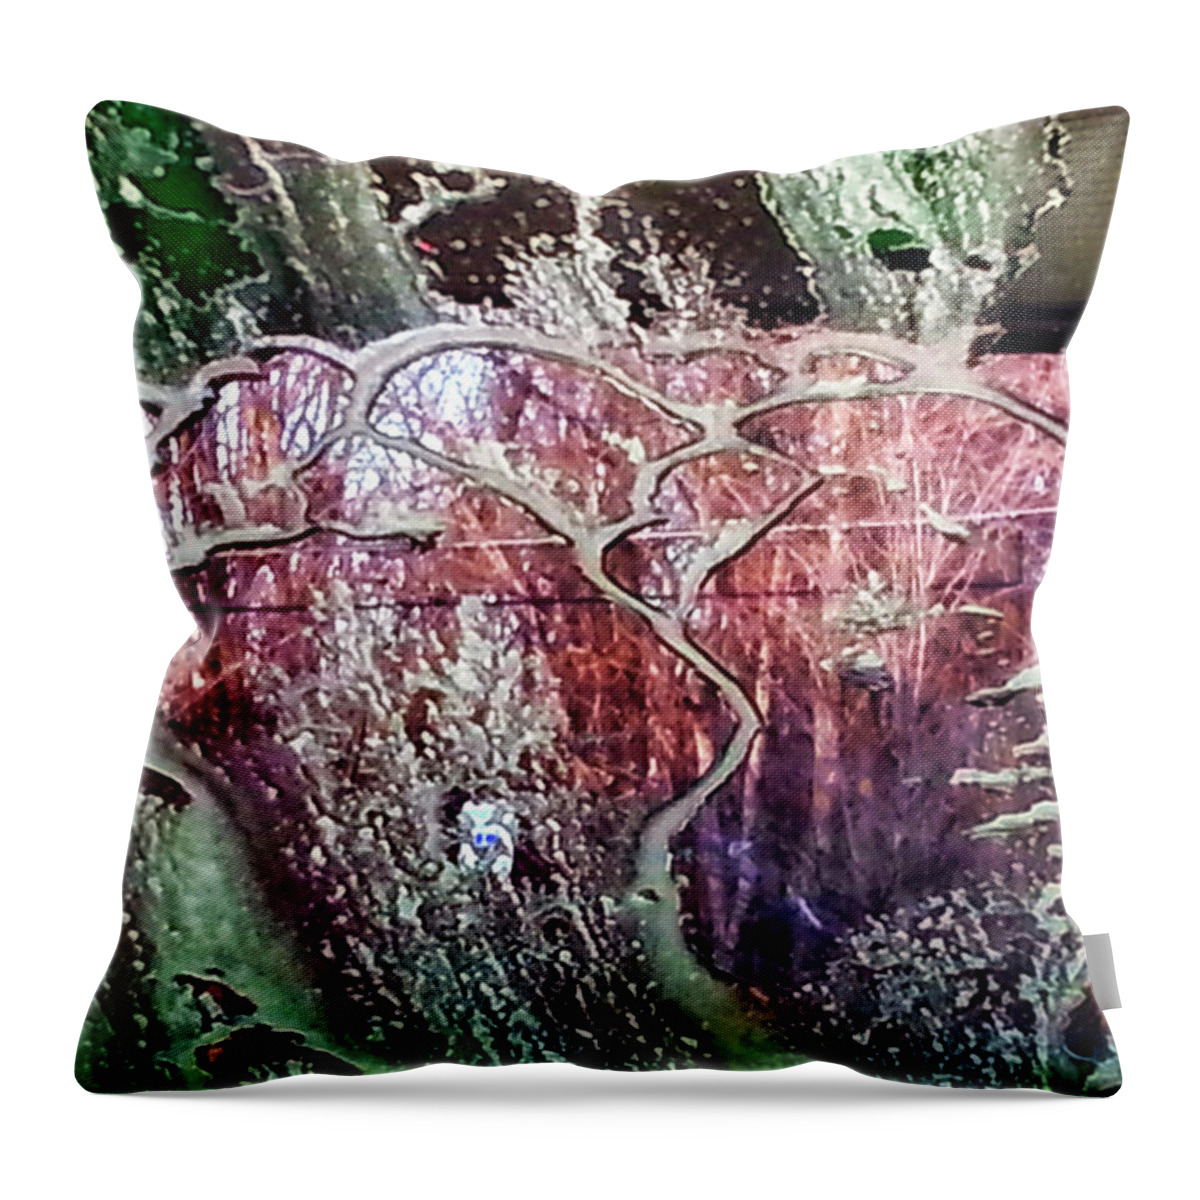 Water Throw Pillow featuring the photograph Foam by Gerlinde Keating - Galleria GK Keating Associates Inc